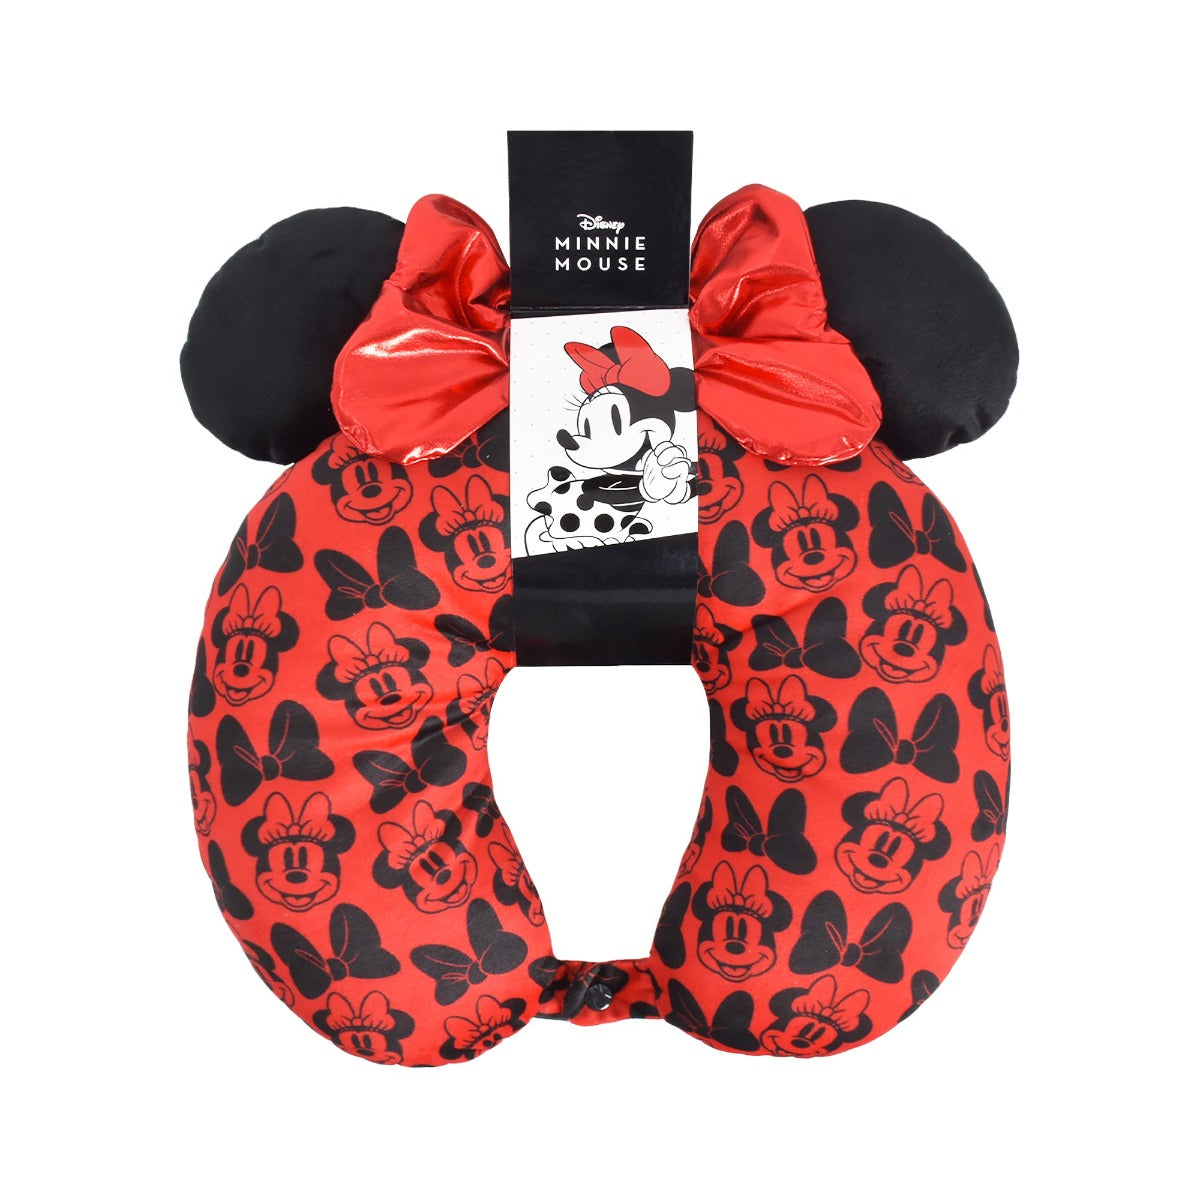 Red Disney Minnie Mouse with 3D ears and bow - best traveling neck pillow